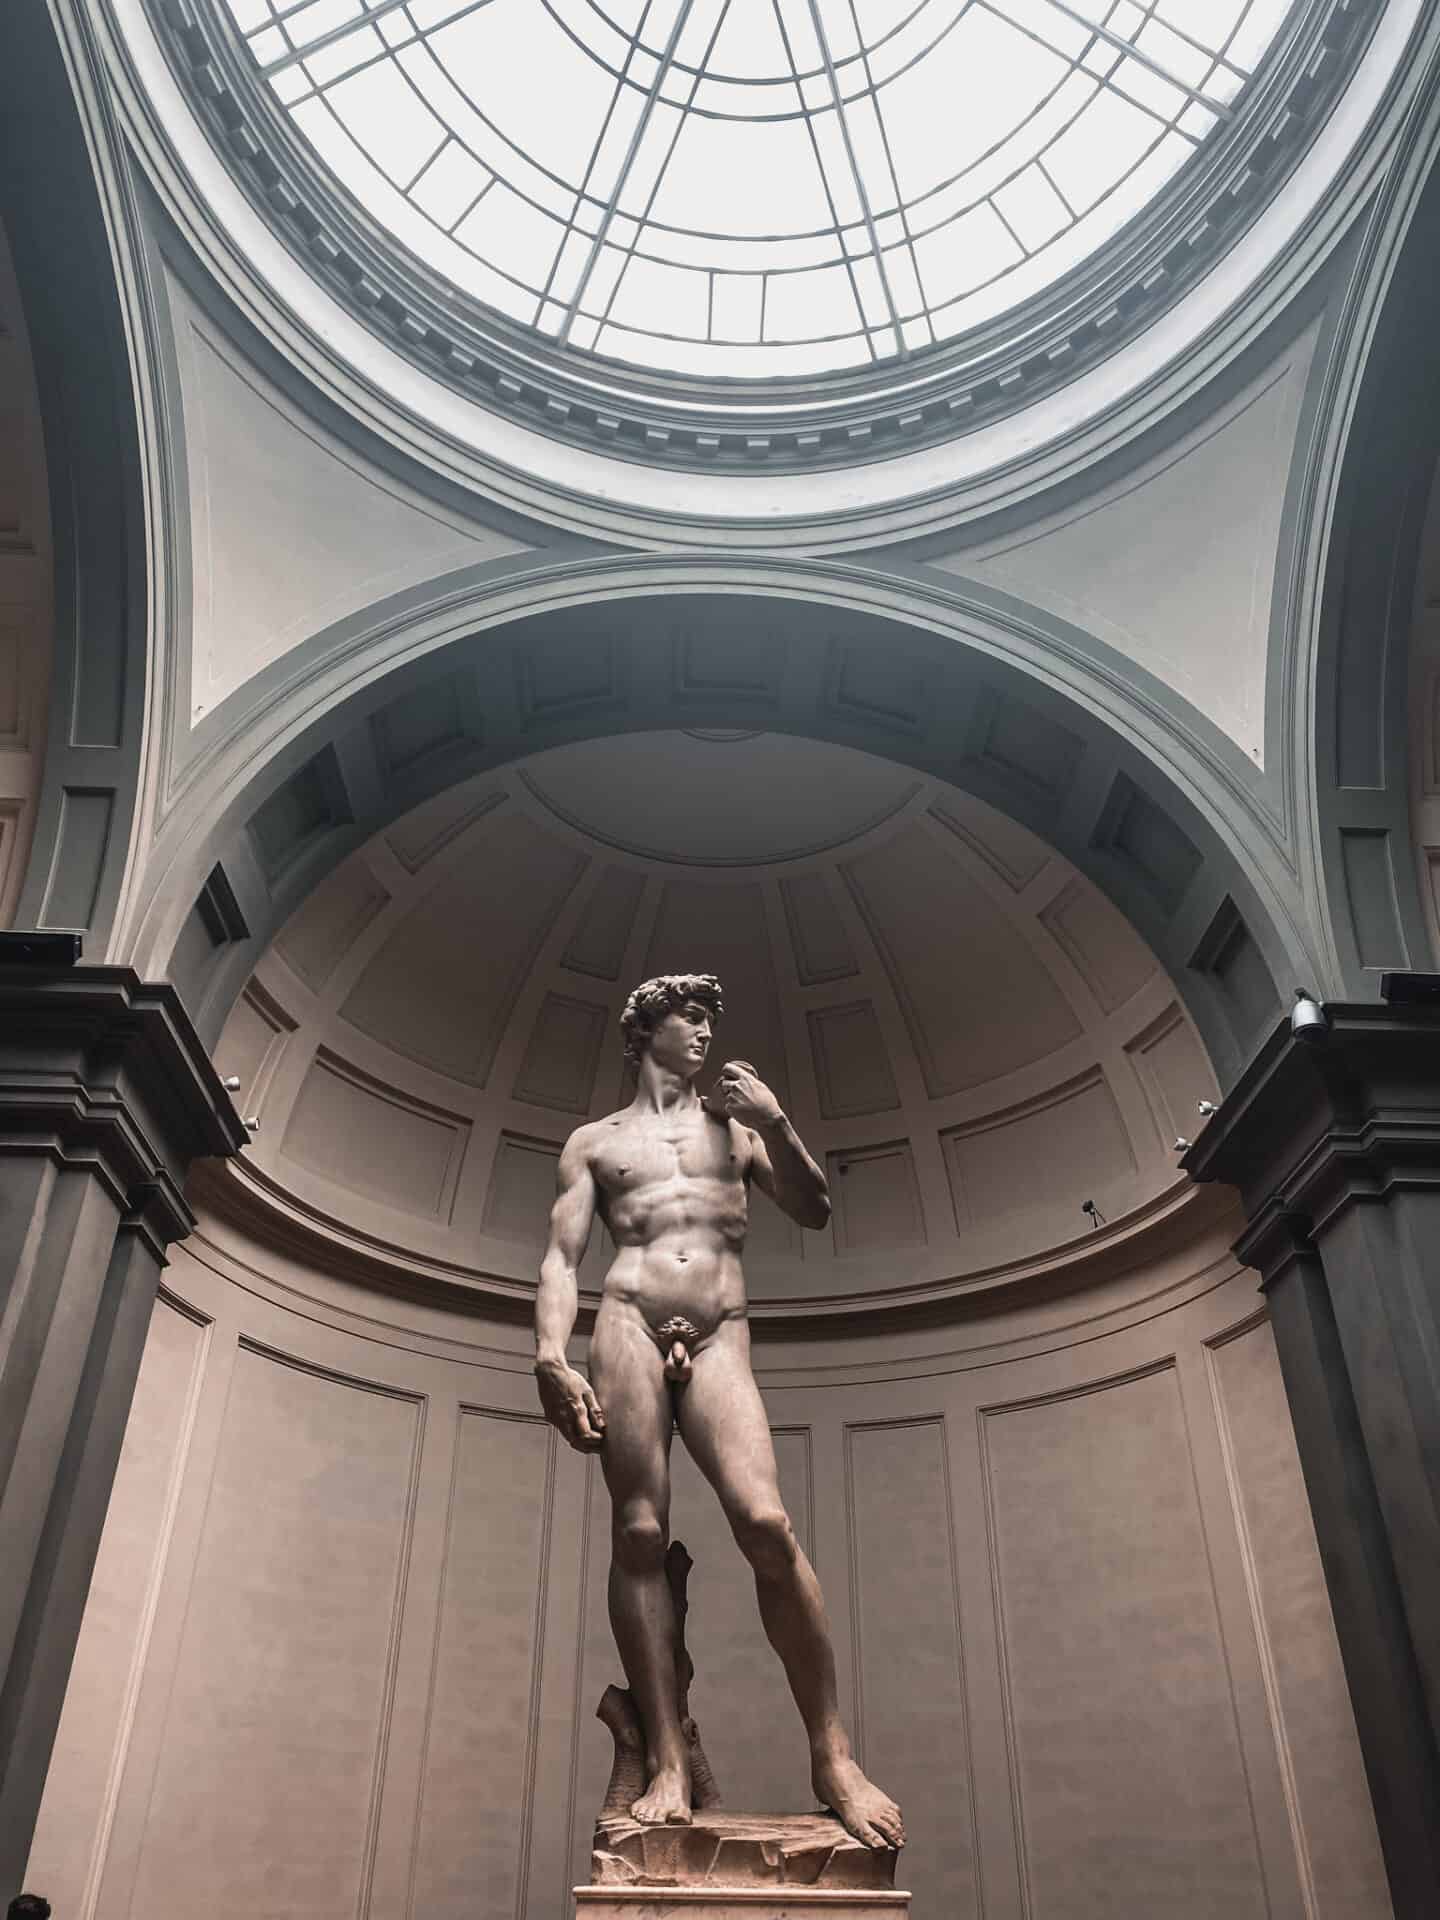 Michelangelo's Statue of David in the Accademia Gallery in Florence